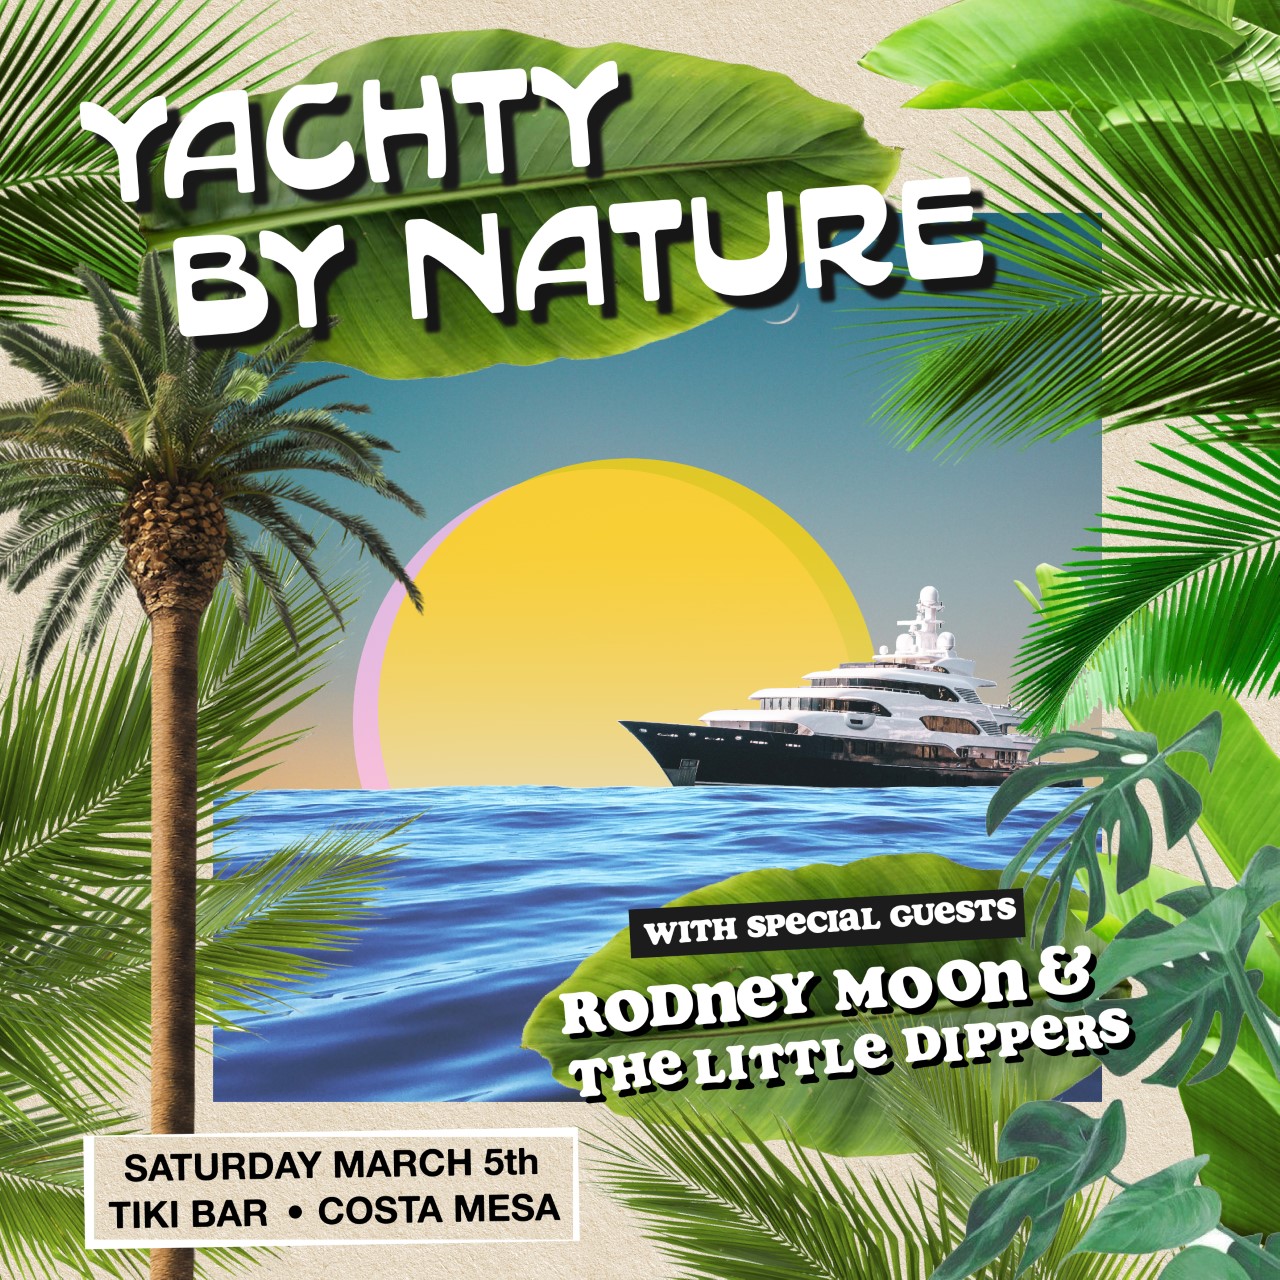 yachty by nature san clemente